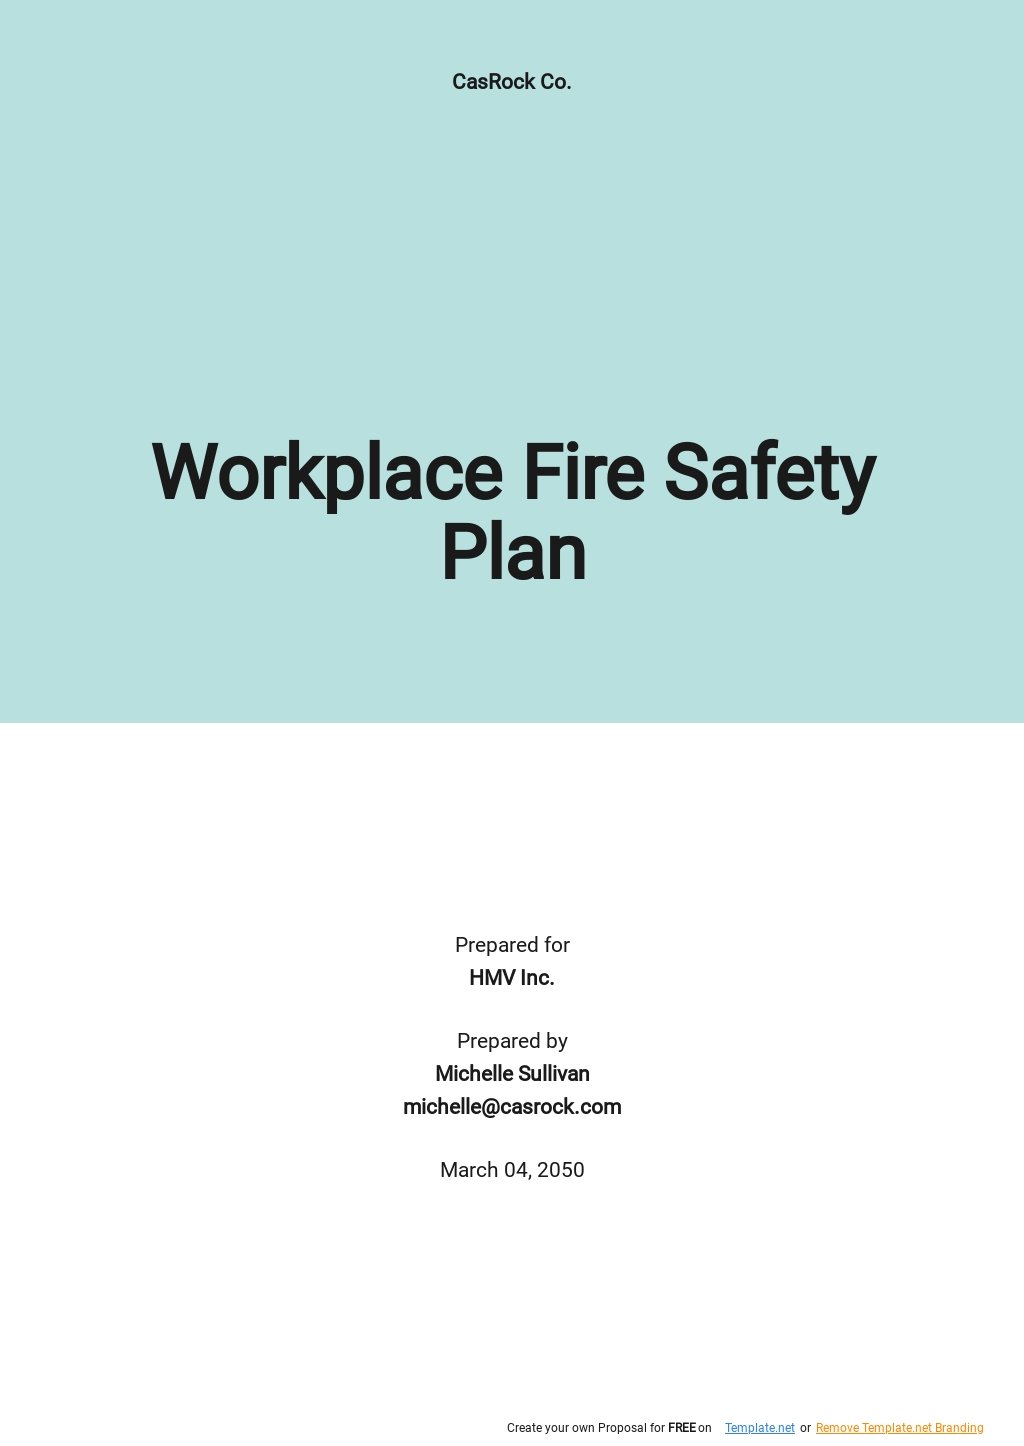 Workplace Fire Safety Plan Template.jpe